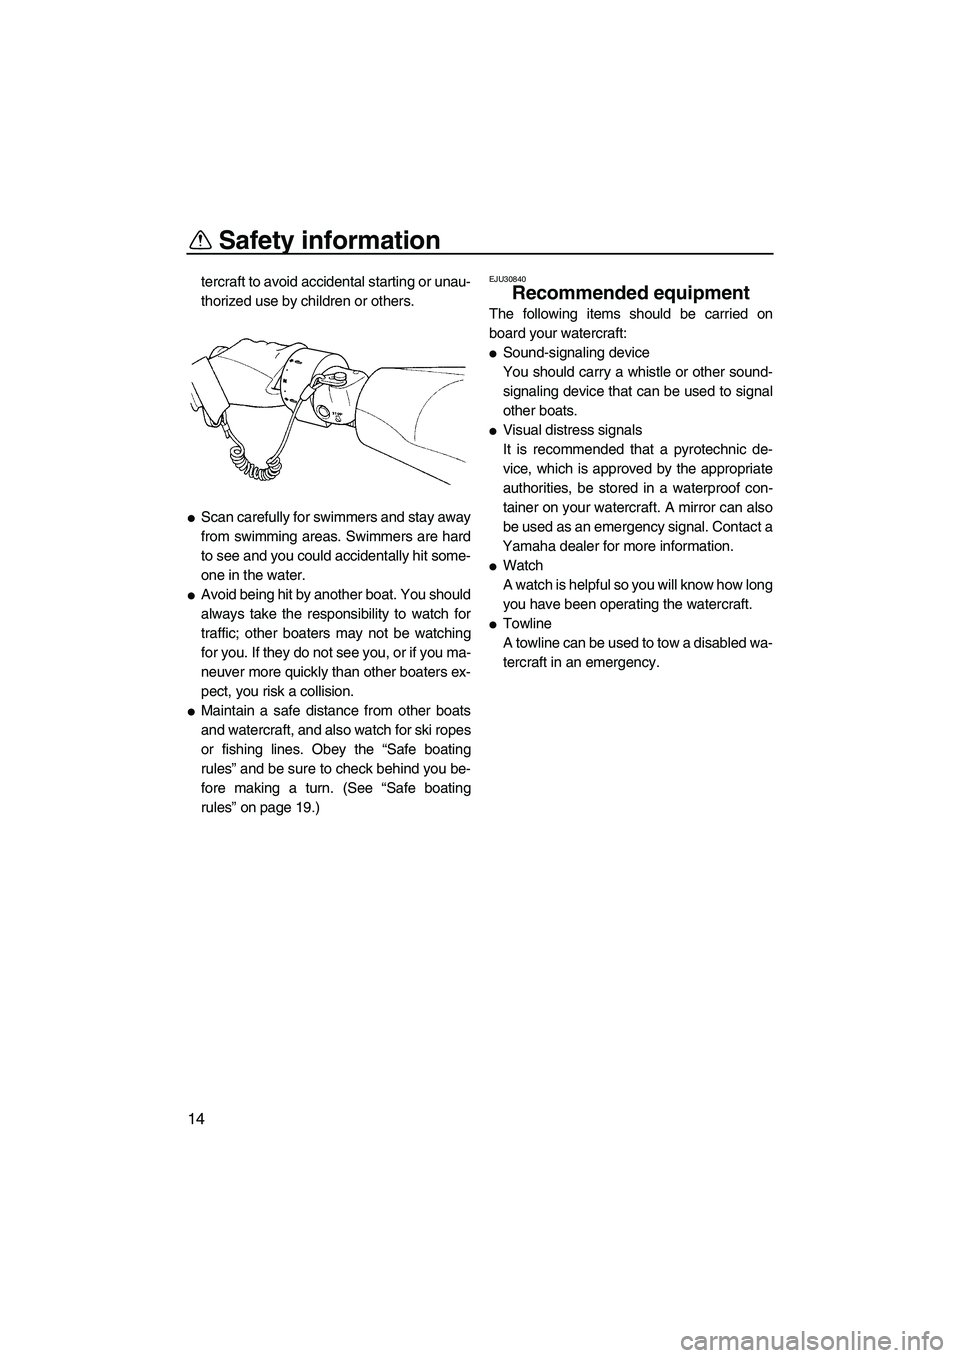 YAMAHA SVHO 2011 User Guide Safety information
14
tercraft to avoid accidental starting or unau-
thorized use by children or others.
Scan carefully for swimmers and stay away
from swimming areas. Swimmers are hard
to see and yo